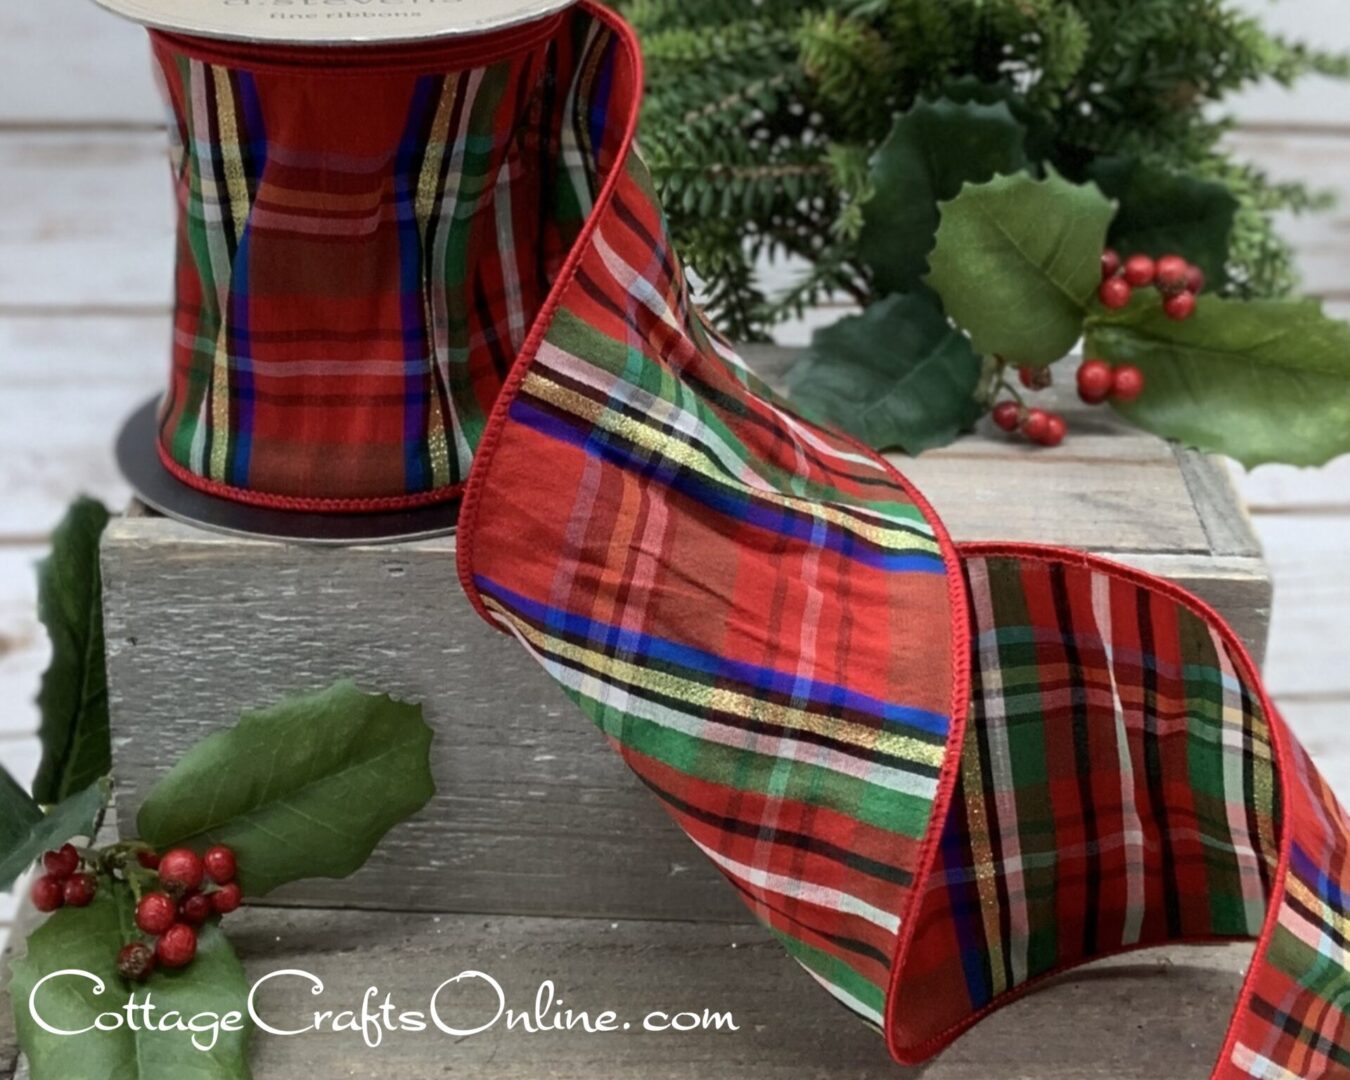 Red tartan with gold blue green white stripes 4" wide wired ribbon from the Etsy shop of Cottage Crafts Online.